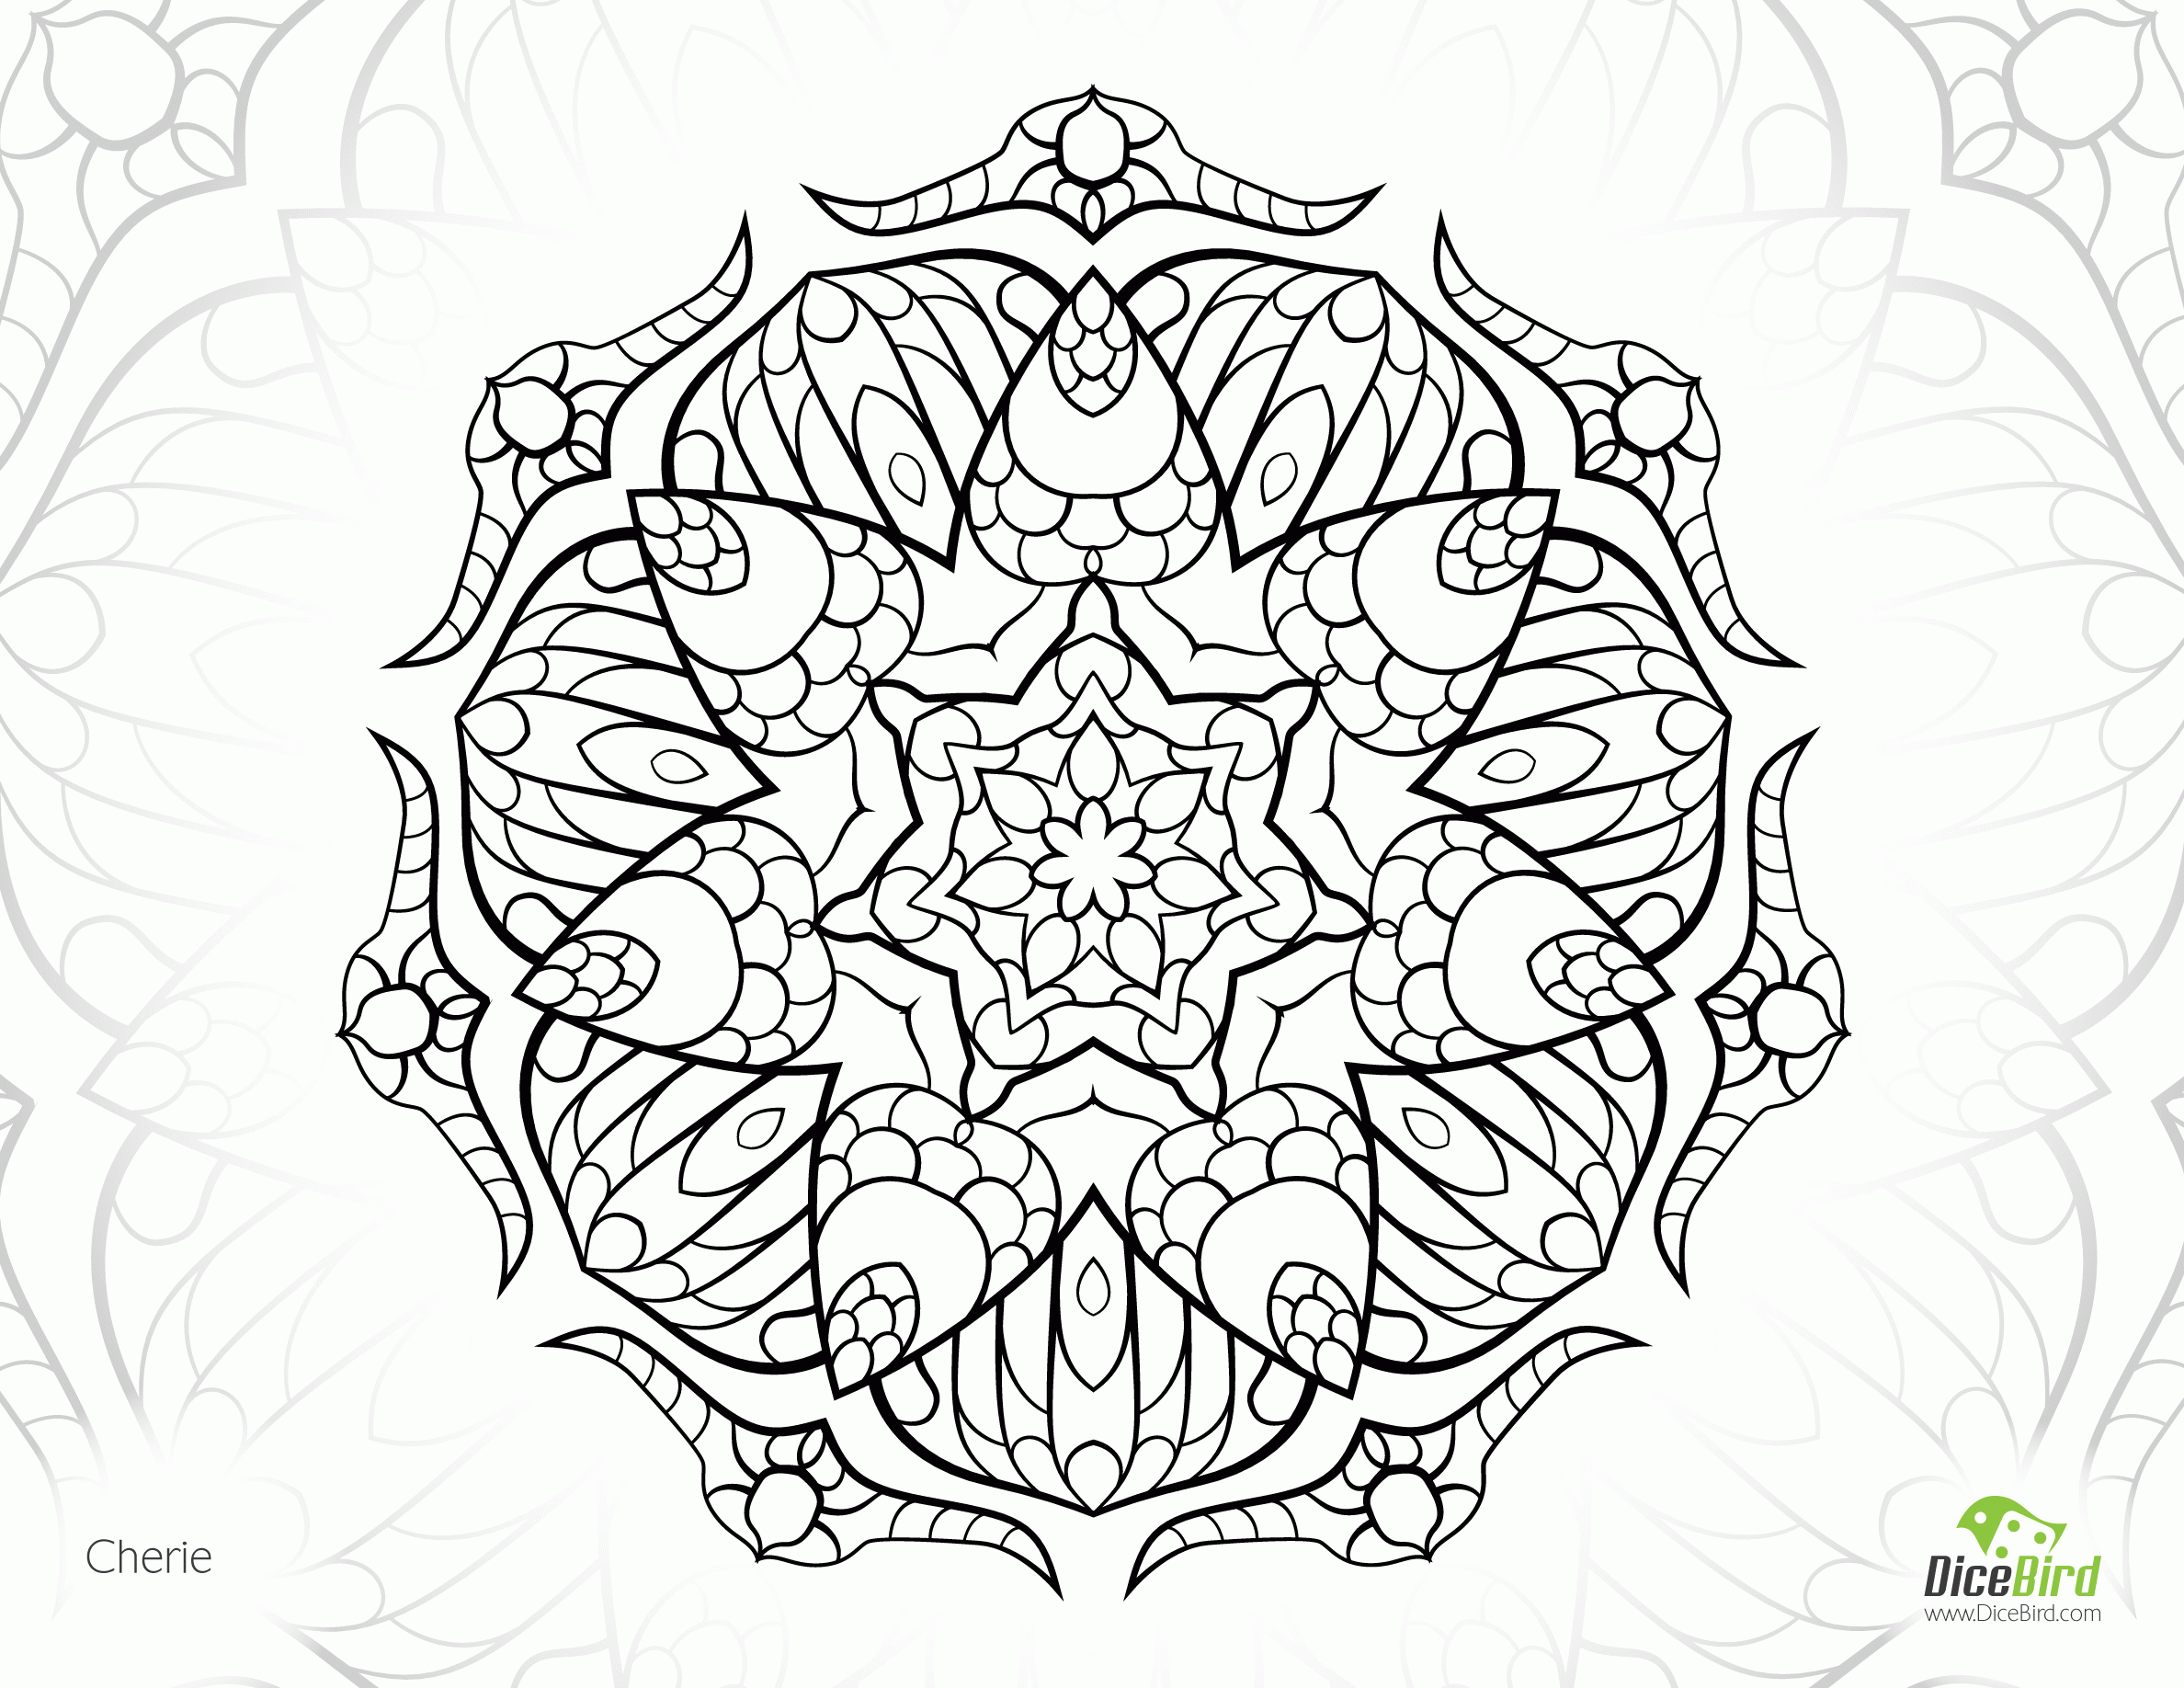 Cherie Flower abstract coloring pages for adults